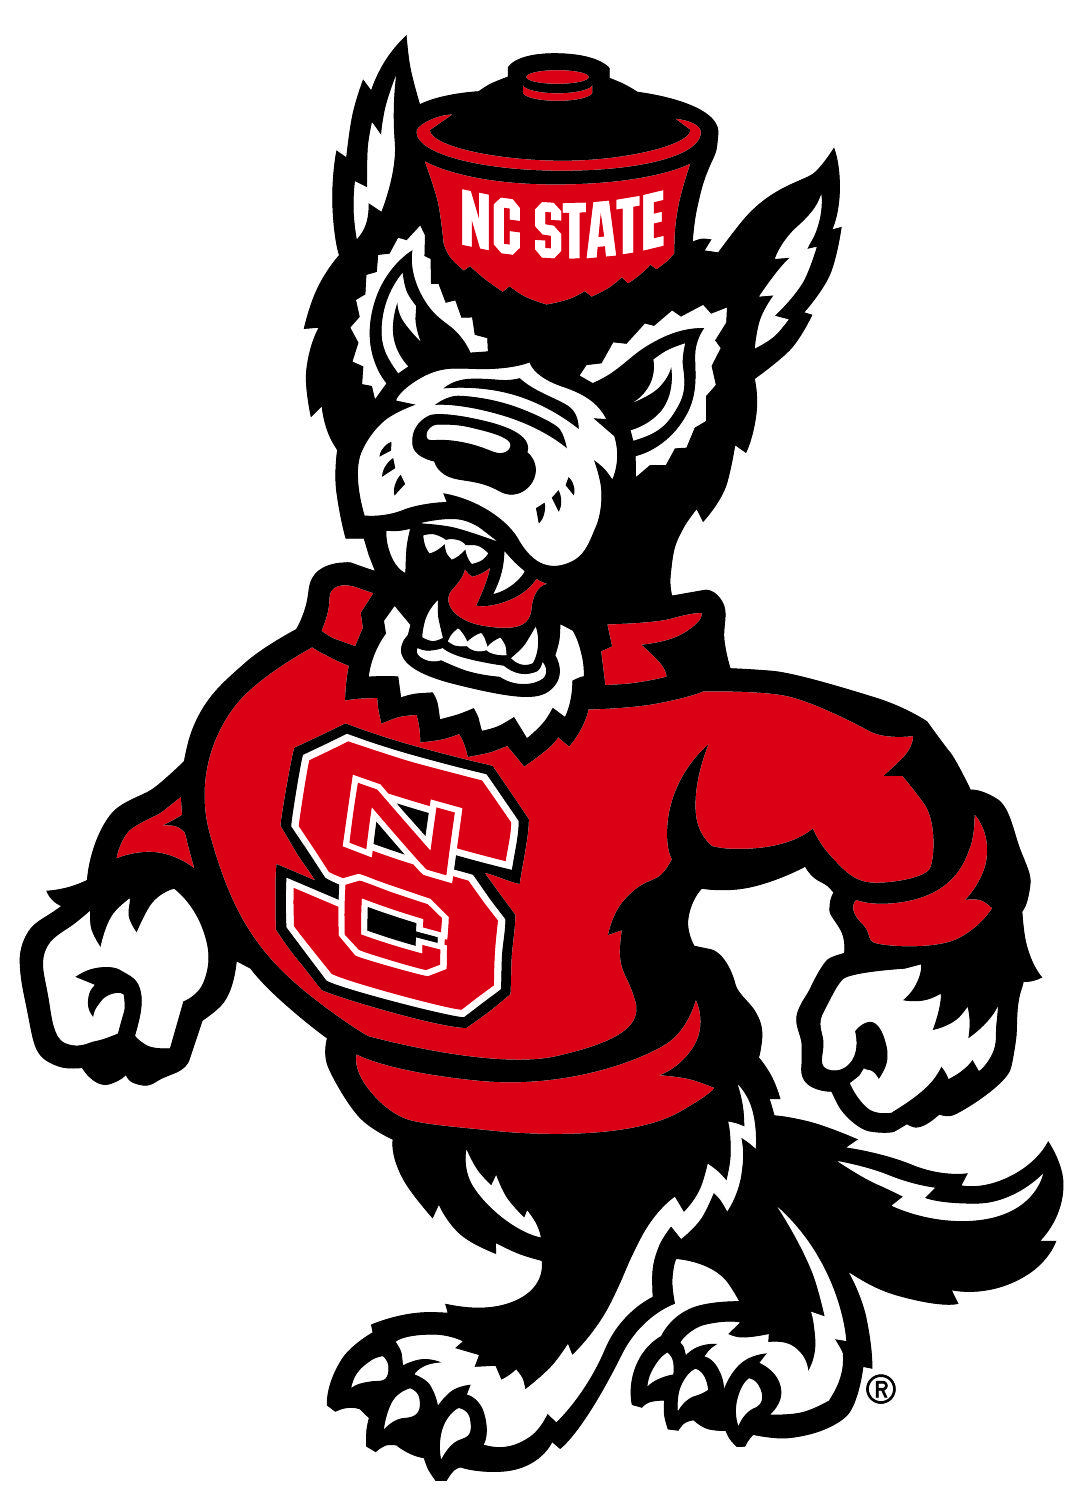 NC State Wolfpack Logo - NC State Athletics Brand Guide - NC State University Athletics